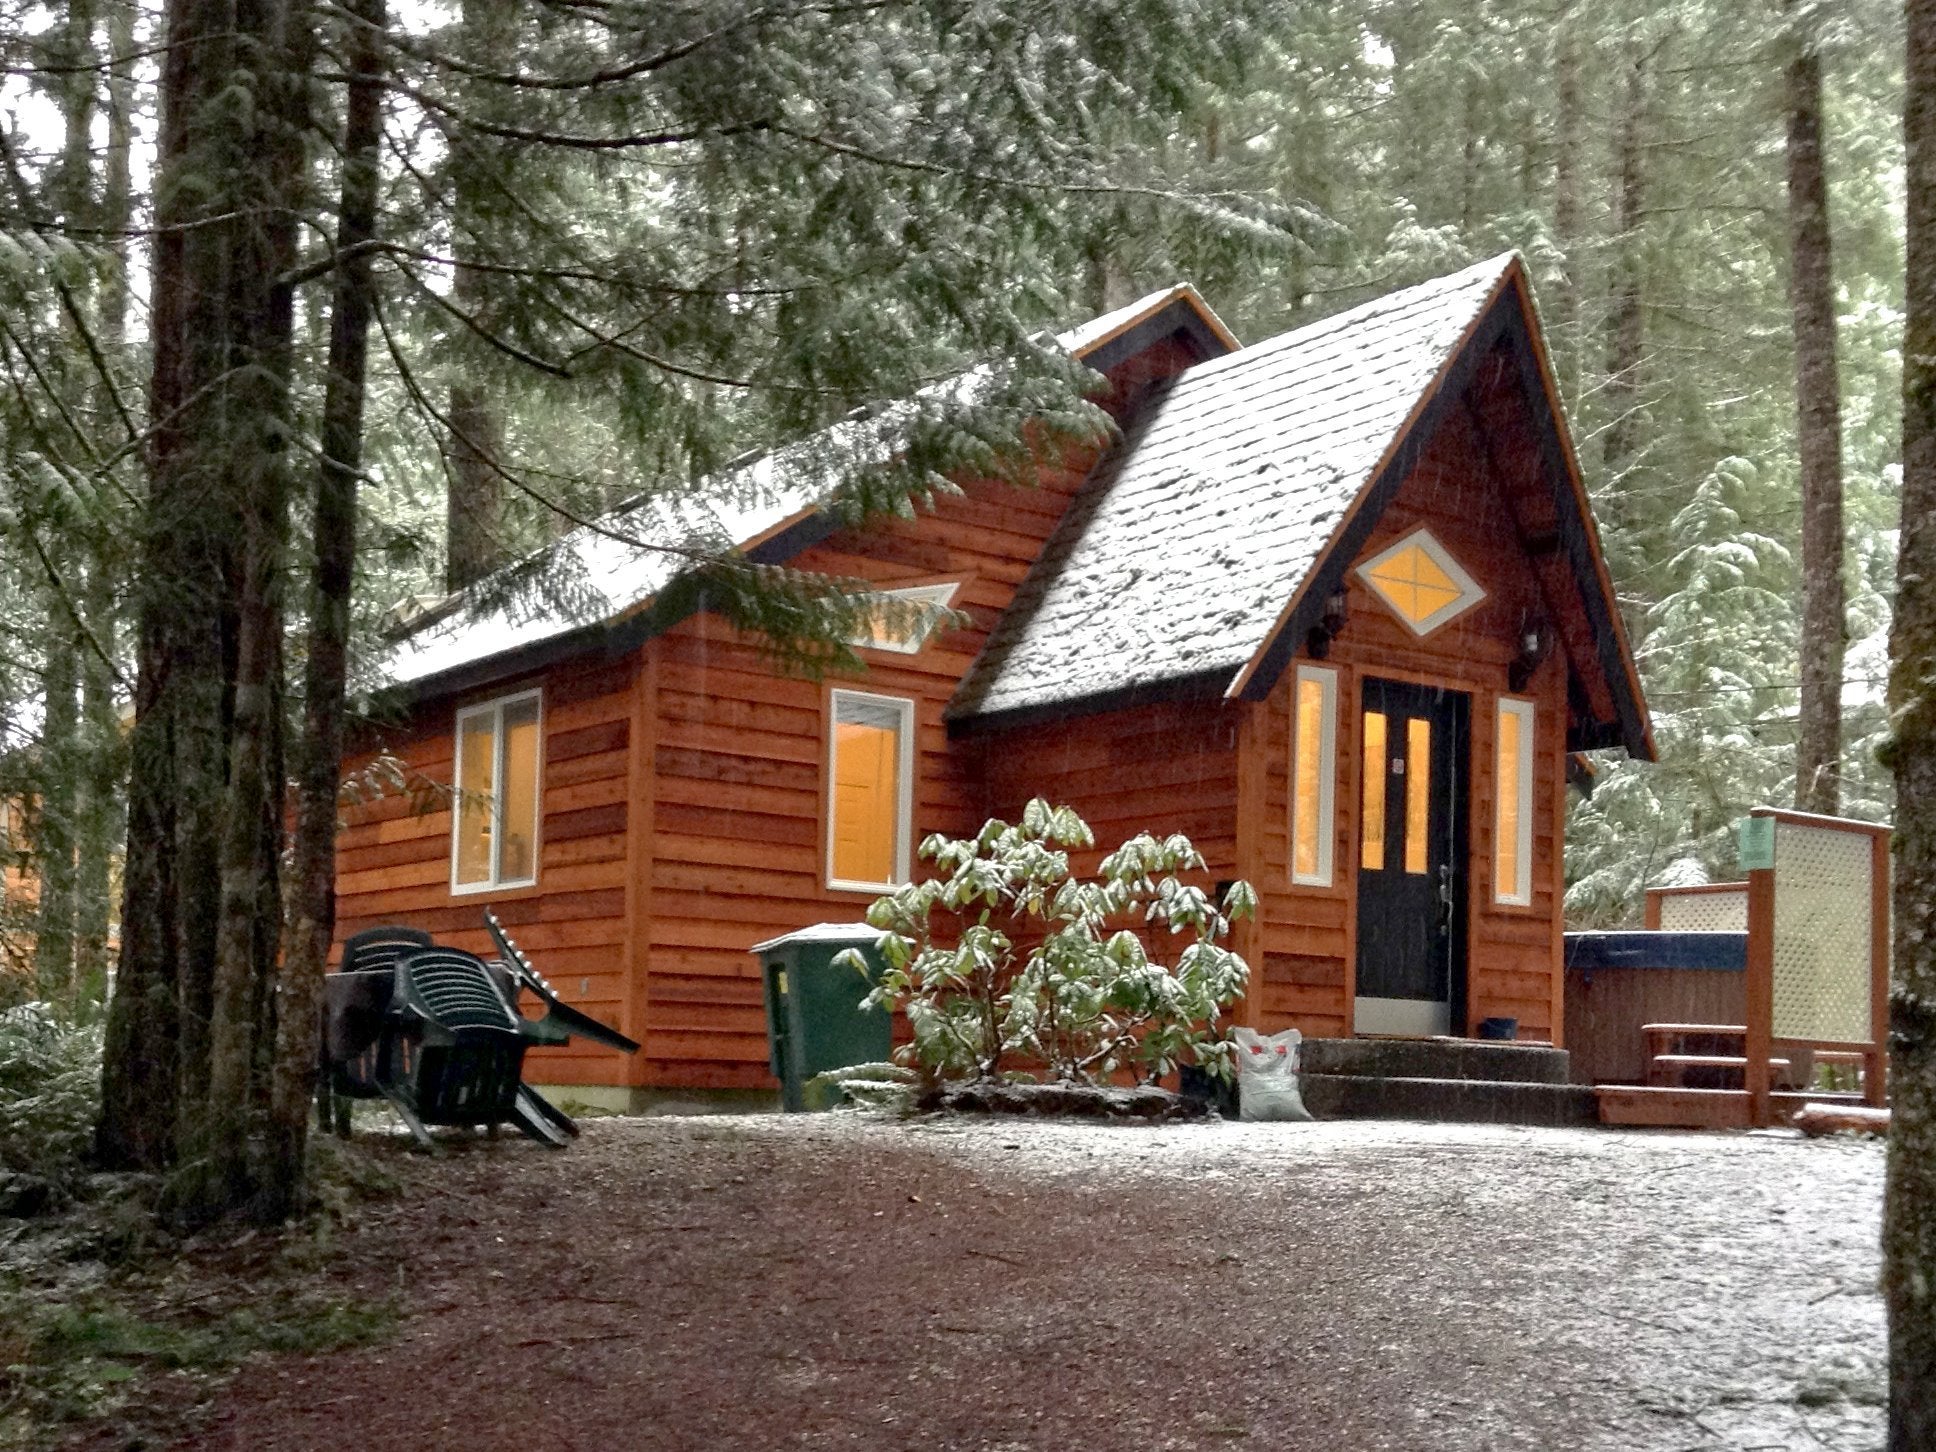 Camper submitted image from Mt. Baker Lodging - Cabin #16 - HOT TUB, FIREPLACE, W/D, D/W, BBQ, PETS OK, SLEEPS-4! - 2